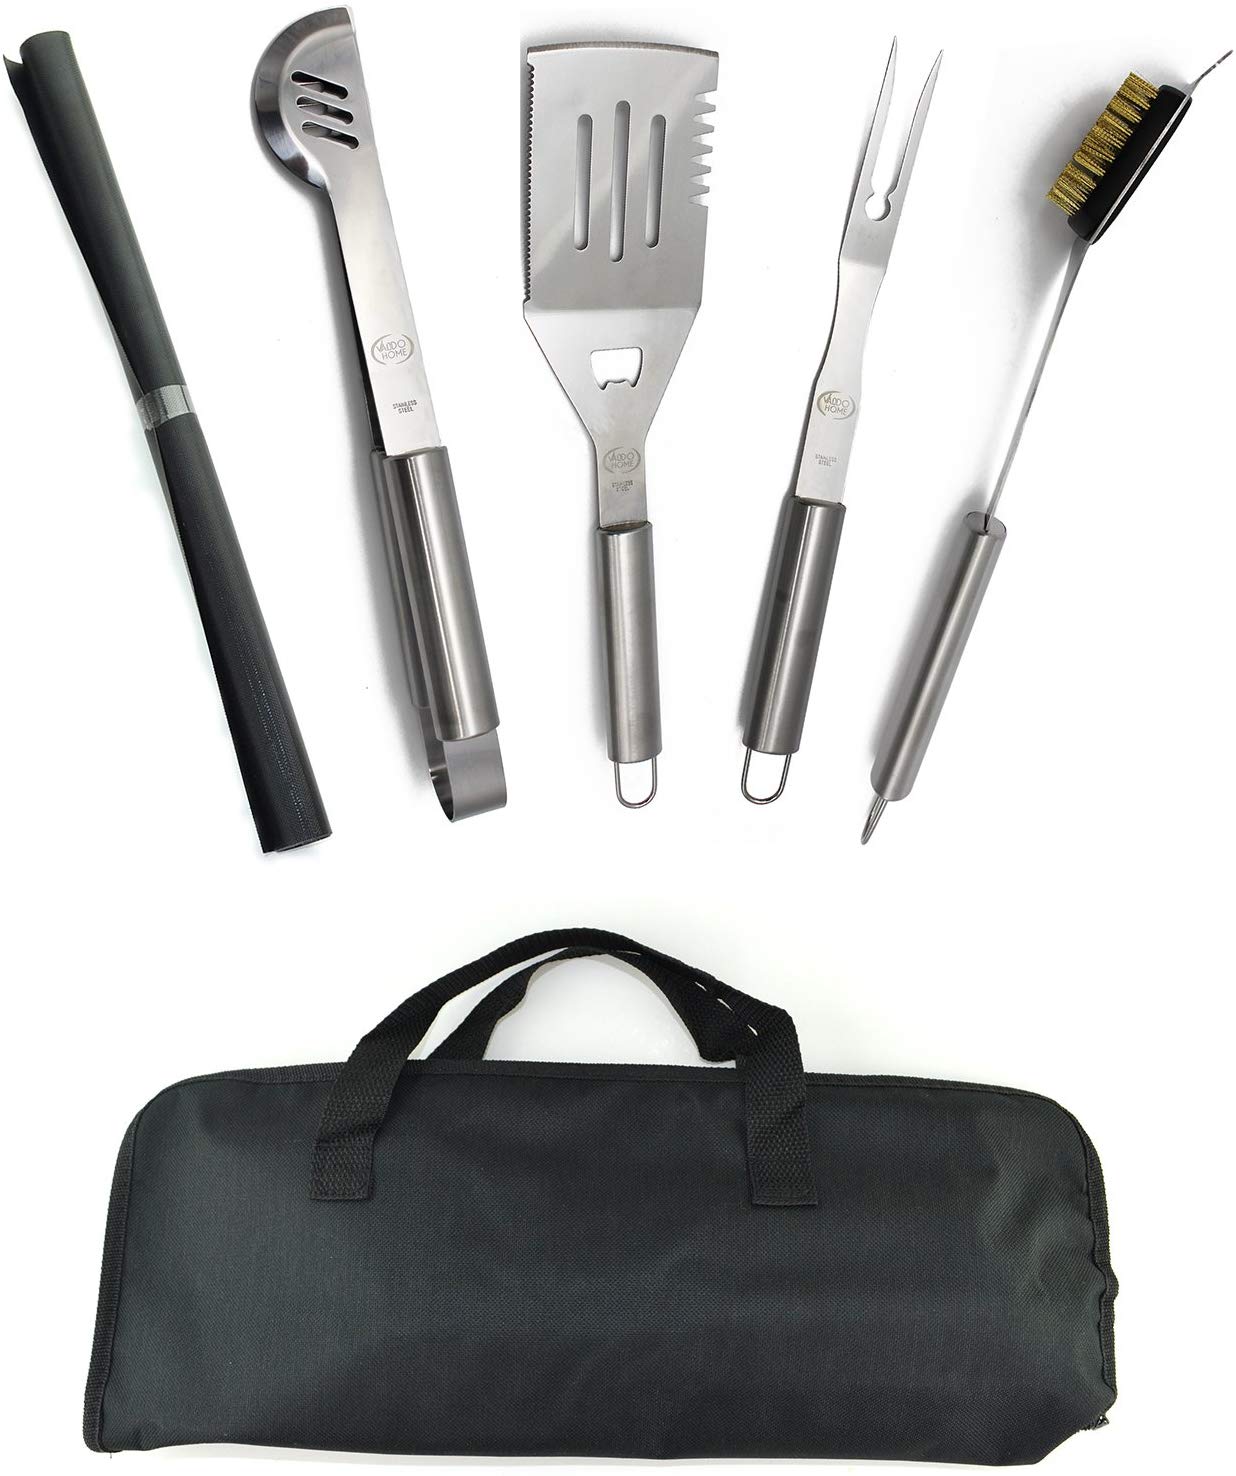 New Stainless Steel BBQ Grill Tools Set – 5 Piece Grilling Tool ...